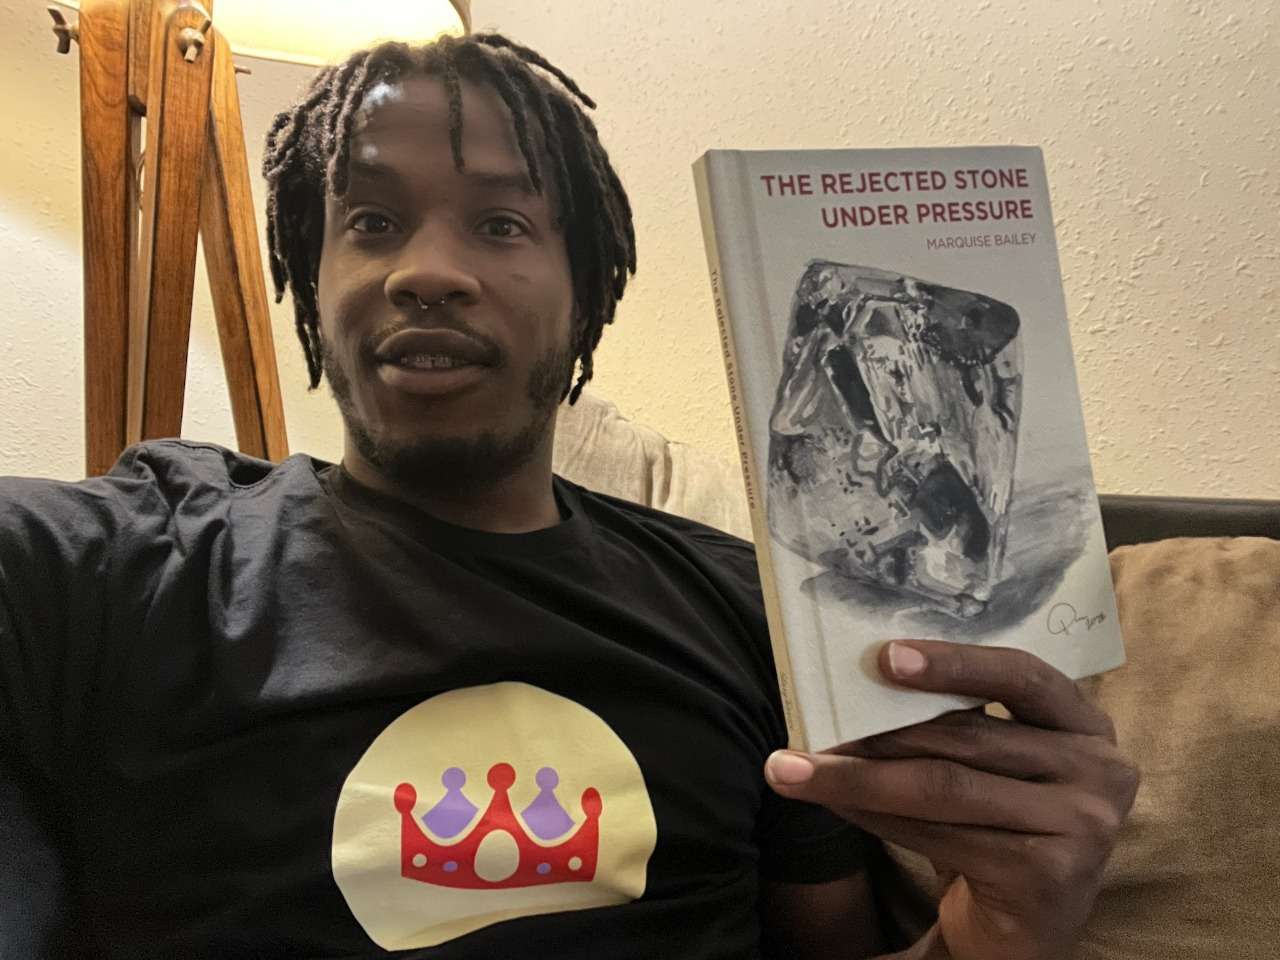 A journey of accepting life with the inspiring book “The rejected stone under pressure” by Marquise Bailey